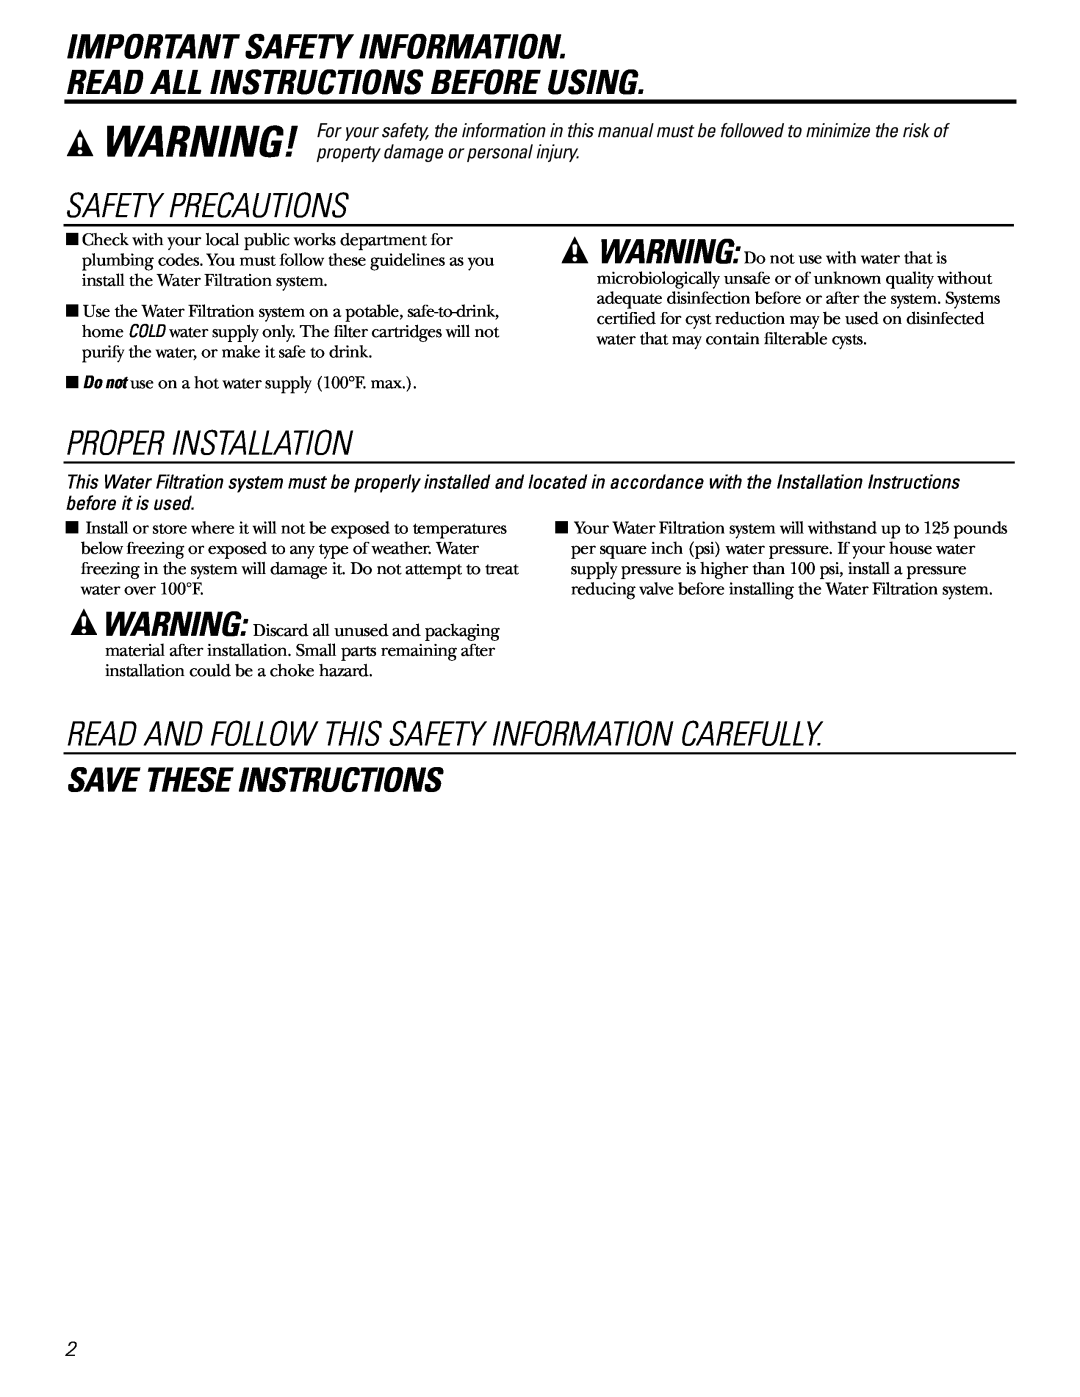 GE 215C1044P010-3 Important Safety Information Read All Instructions Before Using, Safety Precautions, Proper Installation 